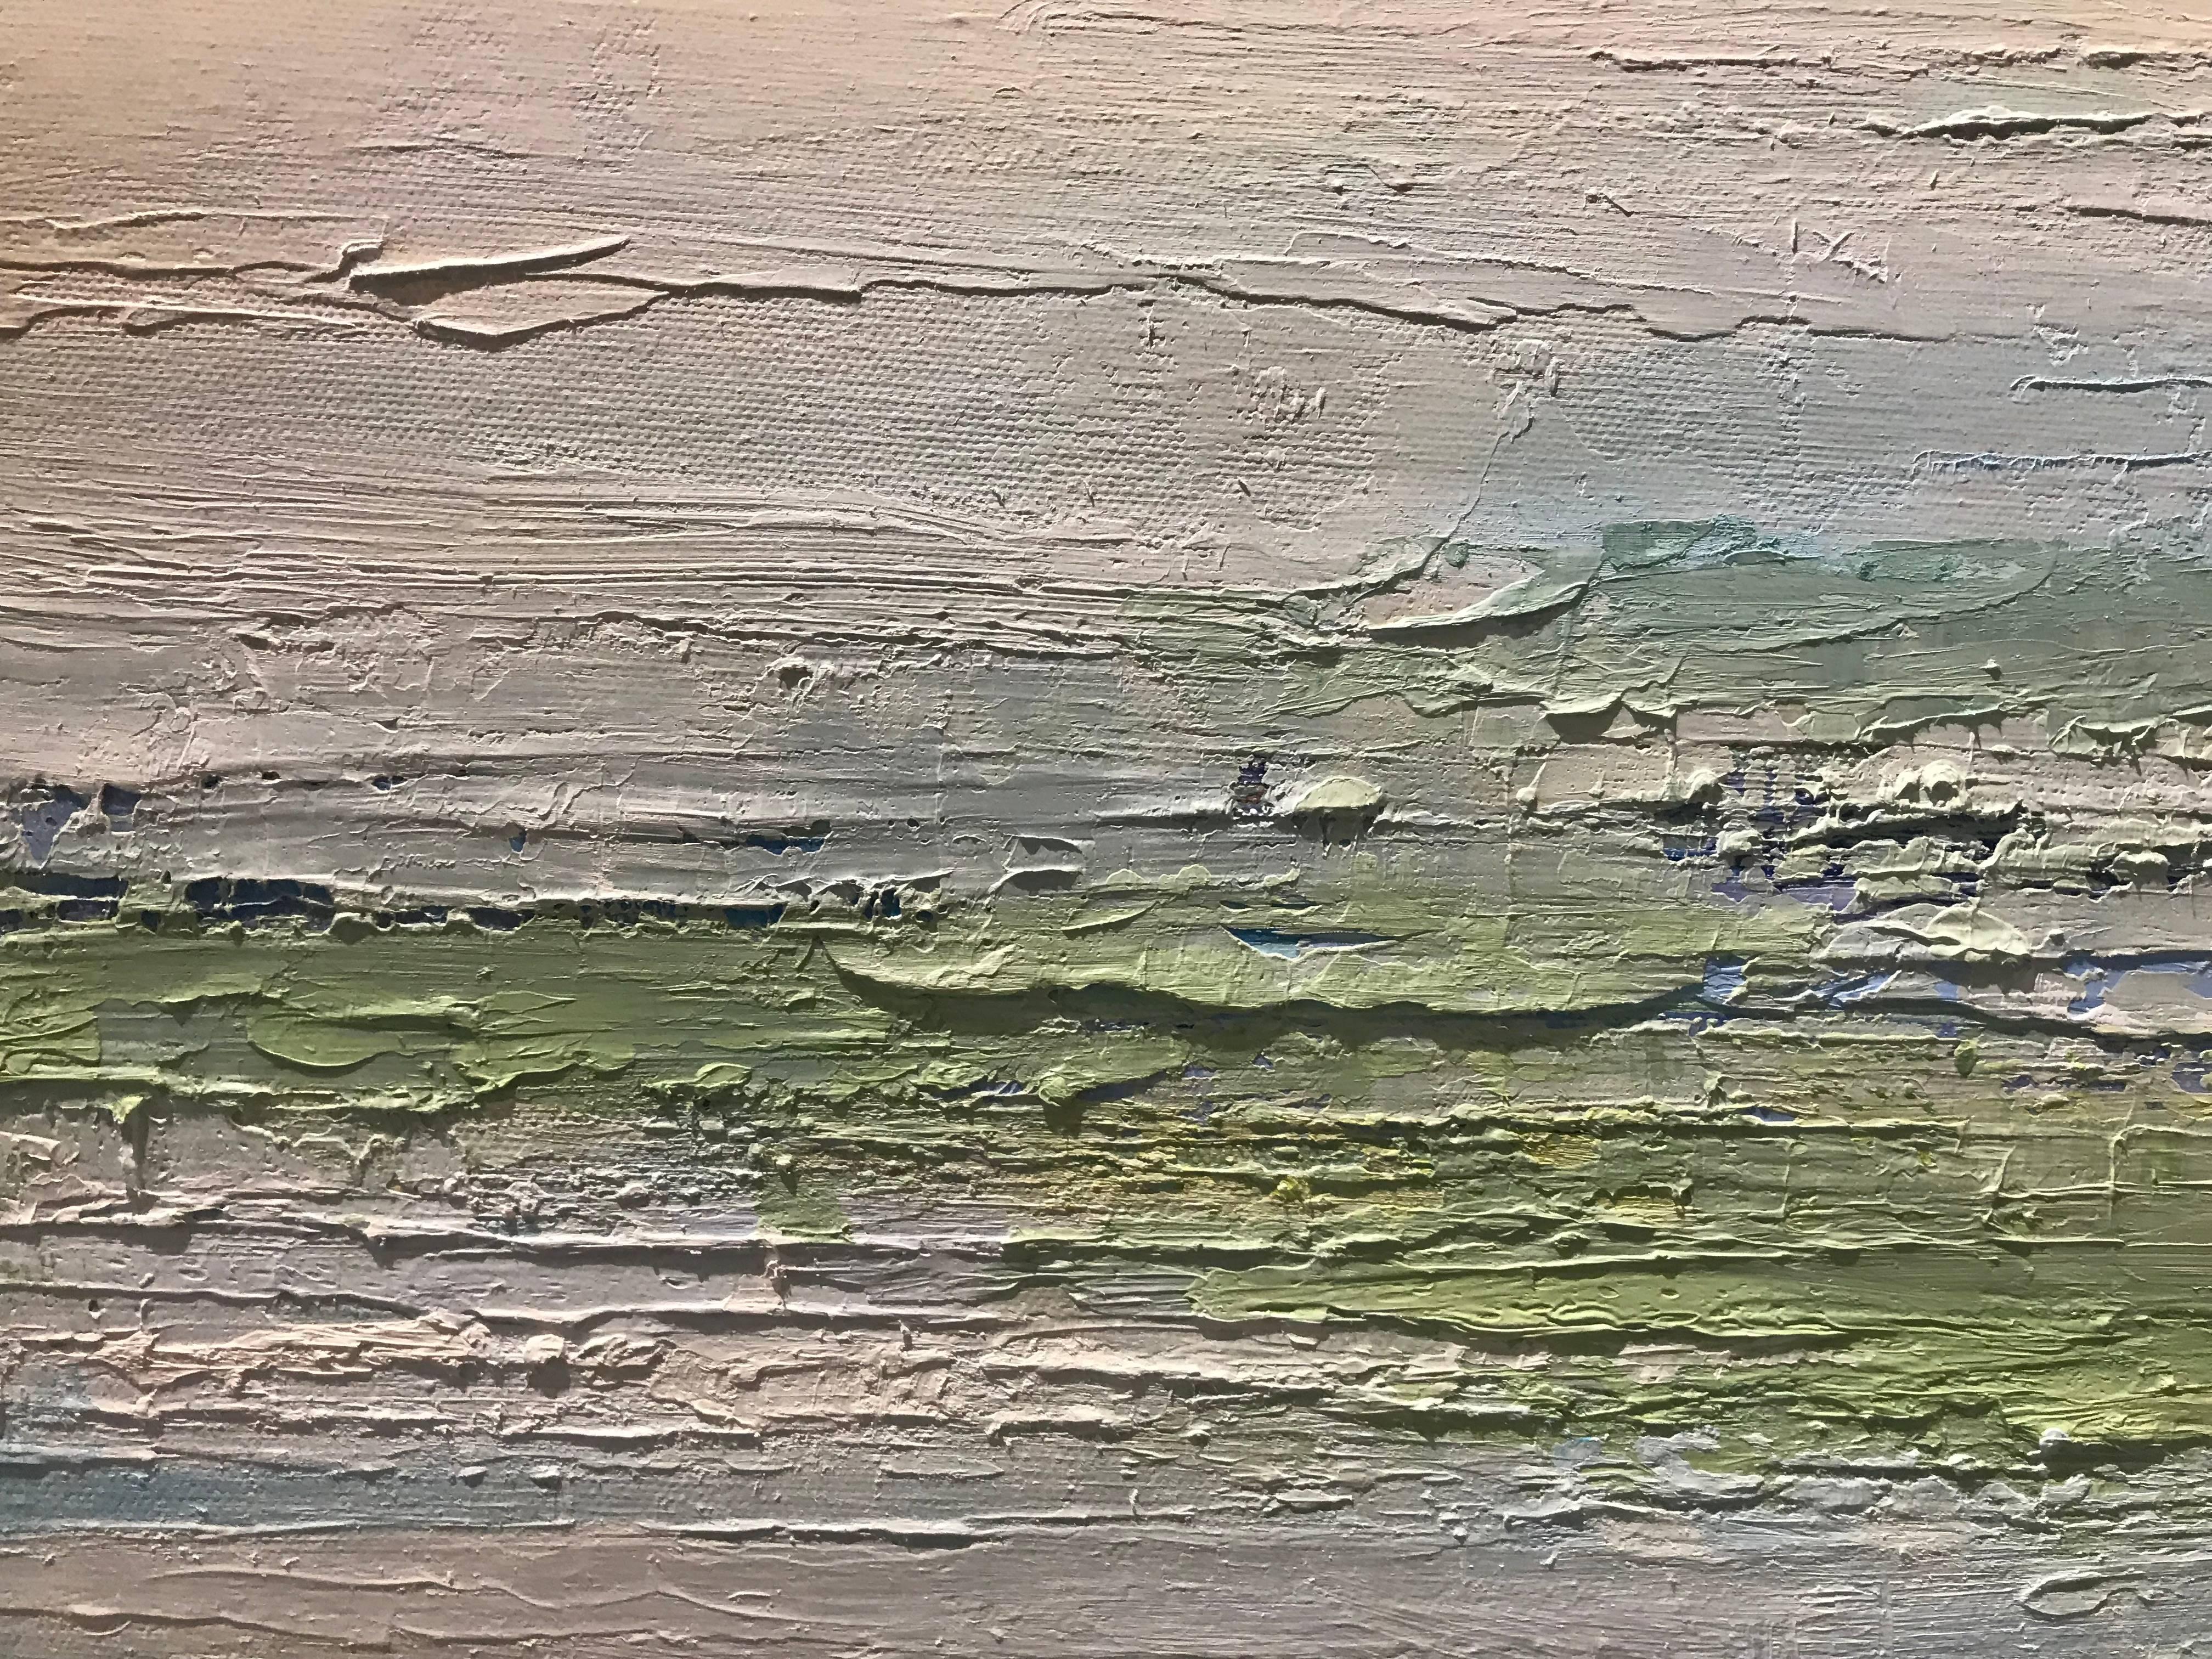 'Cocktails at the Roof Bar' is an abstract oil on canvas painting created by American artist Barbara Sussberg in 2016. Featuring a serene palette made of tans, blues and greens, the linear composition balances the verticality of the format